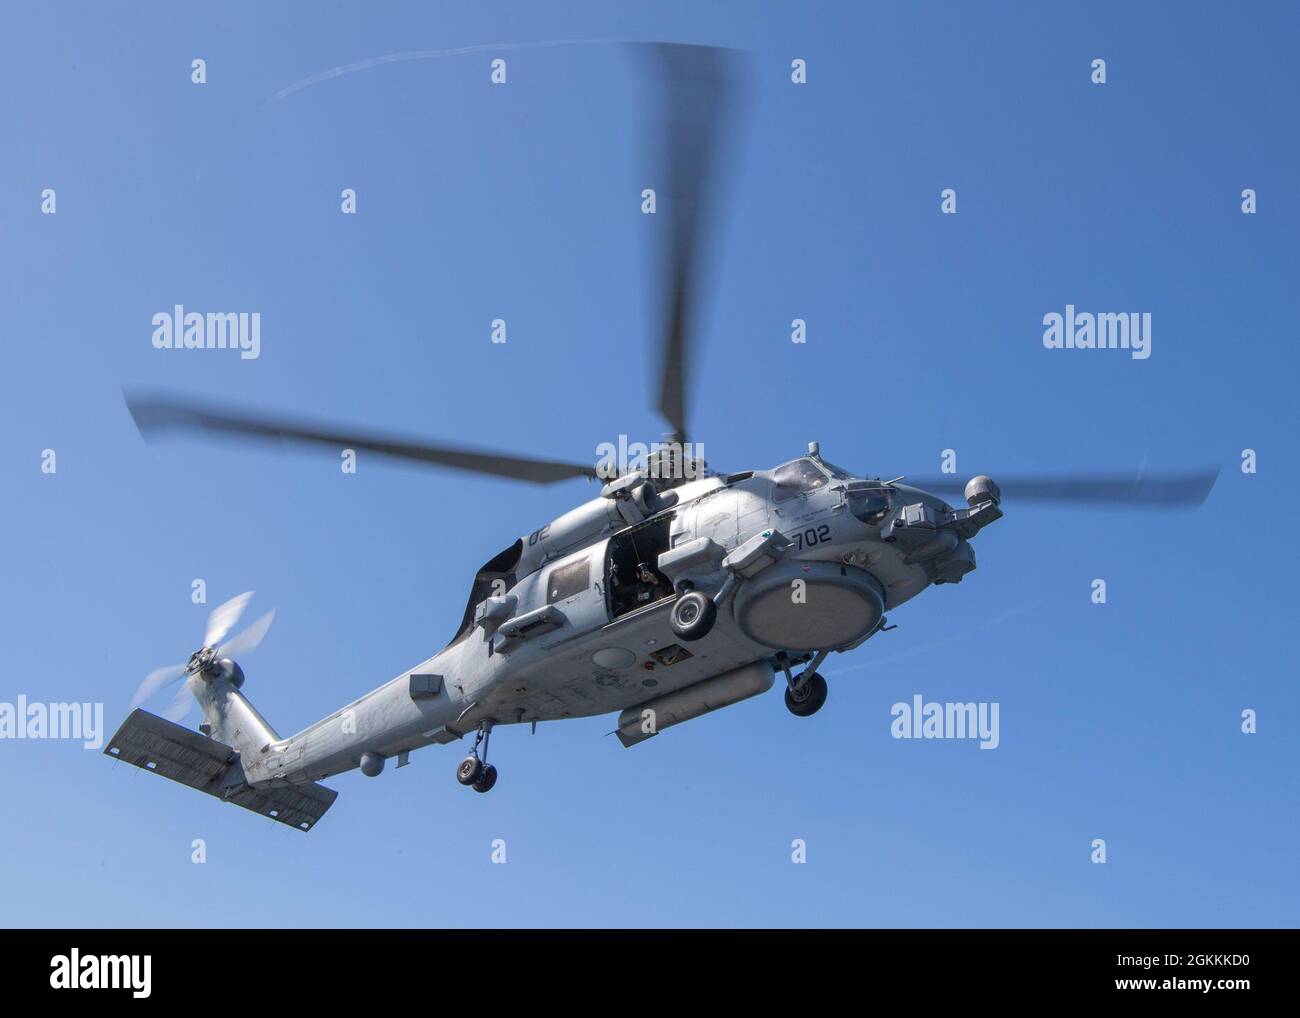 PACIFIC OCEAN (May 18, 2021) An MH-60R Sea Hawk, assigned to the “Wolf Pack” of Helicopter Maritime Strike Squadron (HSM) 75, hovers above the flight deck of the Ticonderoga-class guided-missile cruiser USS Bunker Hill (CG 52) during helicopter in-flight refueling training May 18, 2021. Bunker Hill, part of the Theodore Roosevelt Carrier Strike Group, is on a scheduled deployment conducting routine operations in U.S. 3rd Fleet. Stock Photo